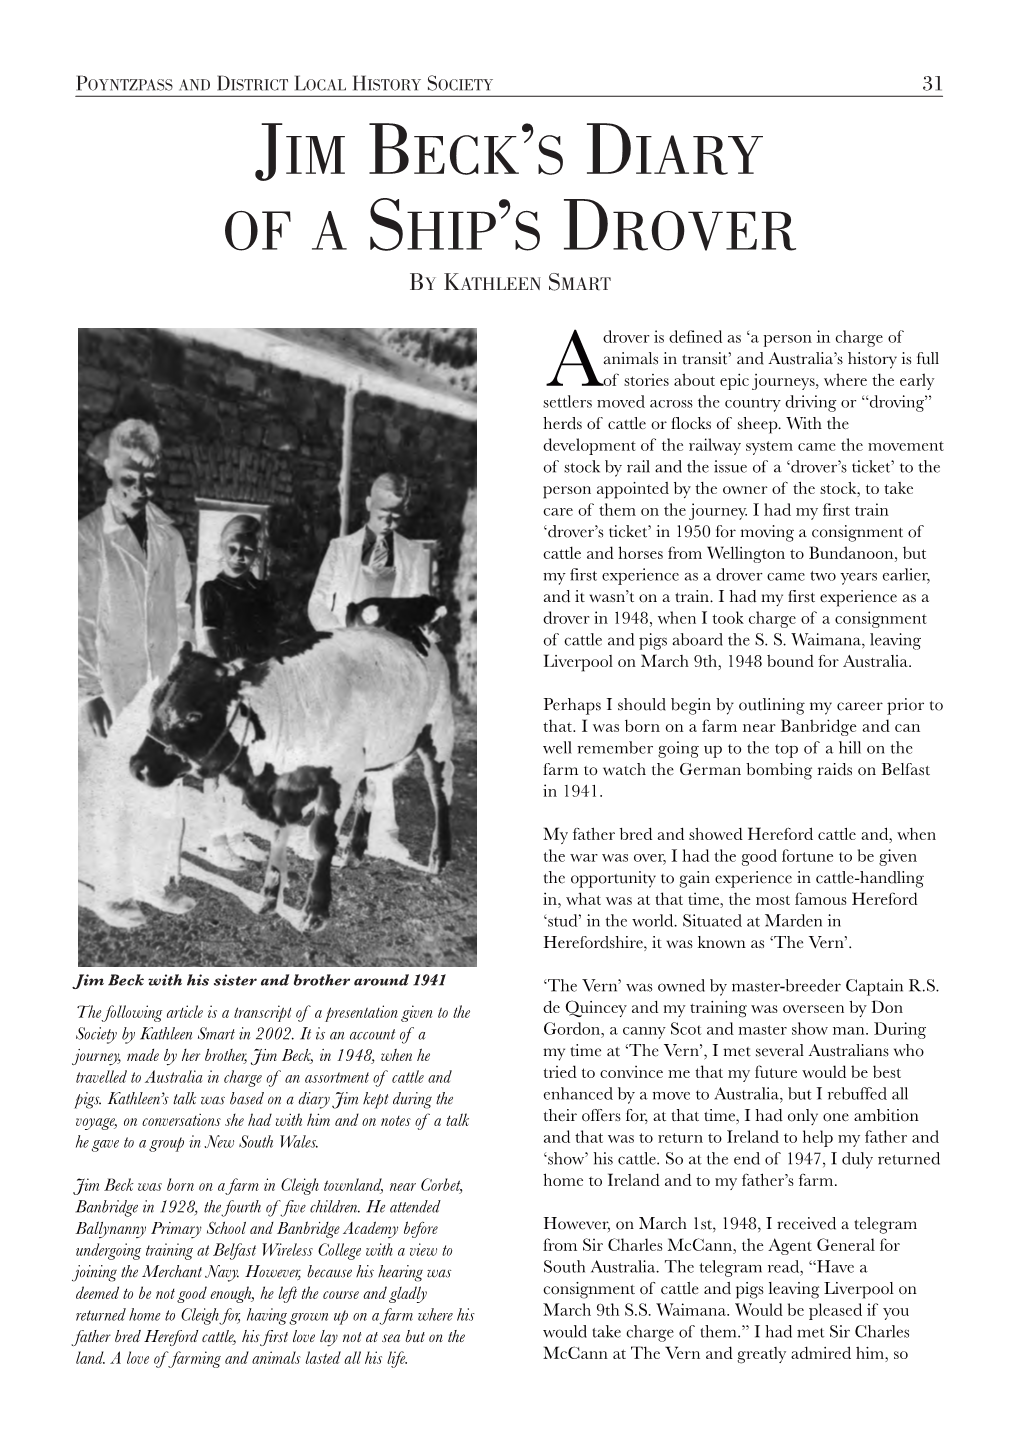 Jim Beck's Diary of a Ship's Drover